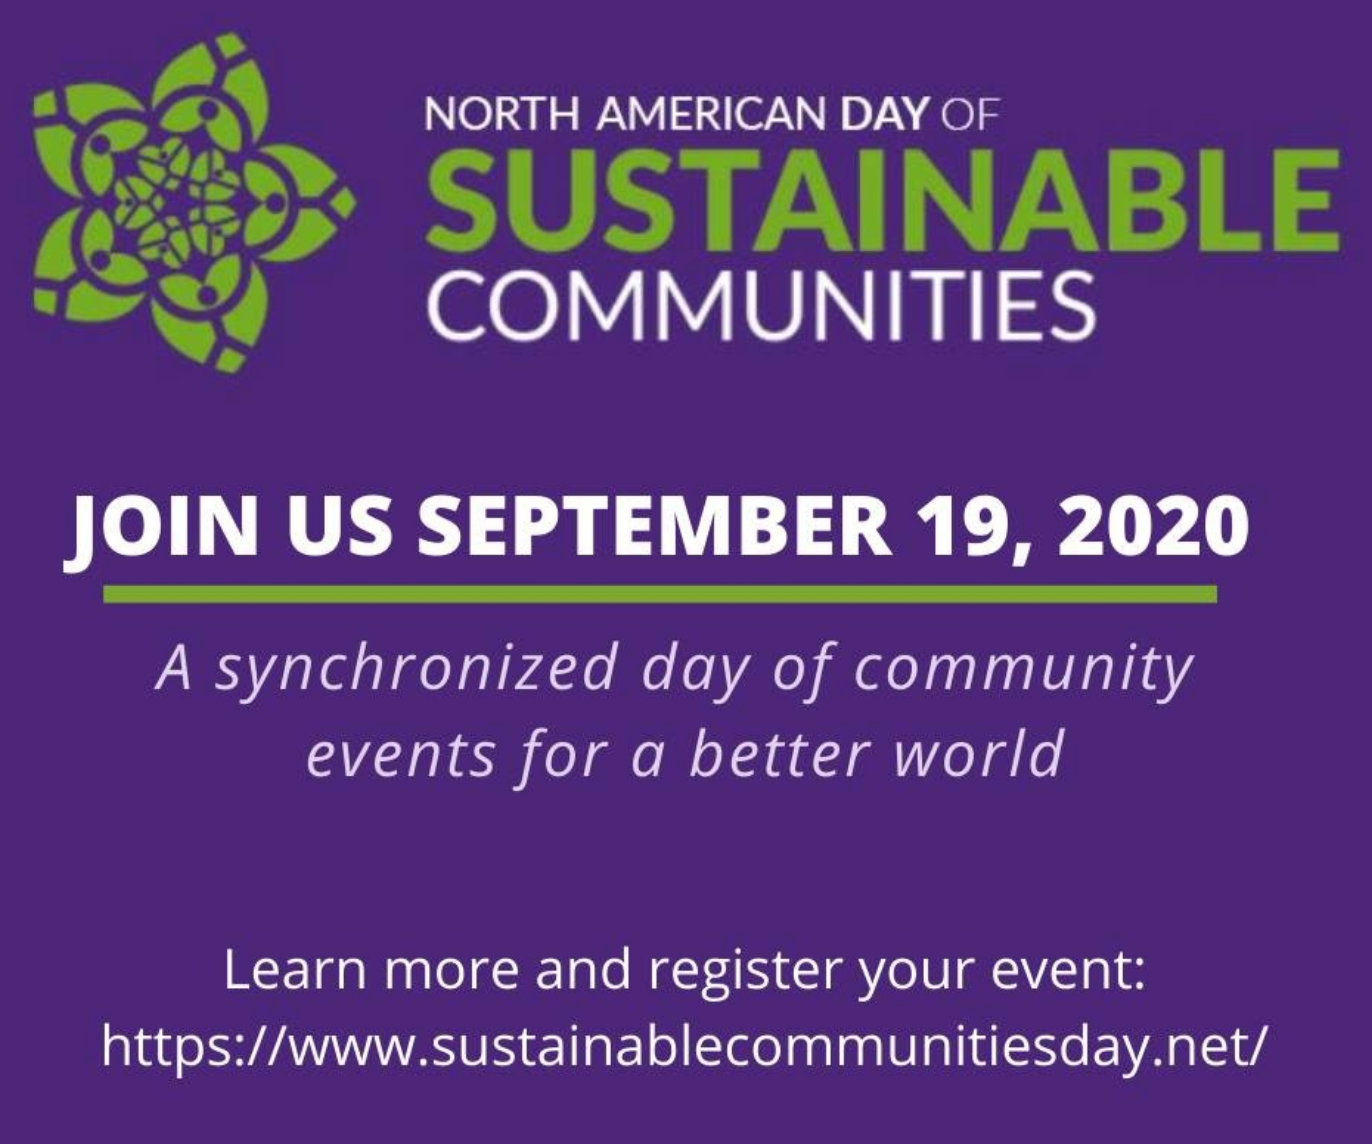 North American Day of Sustainable Communities